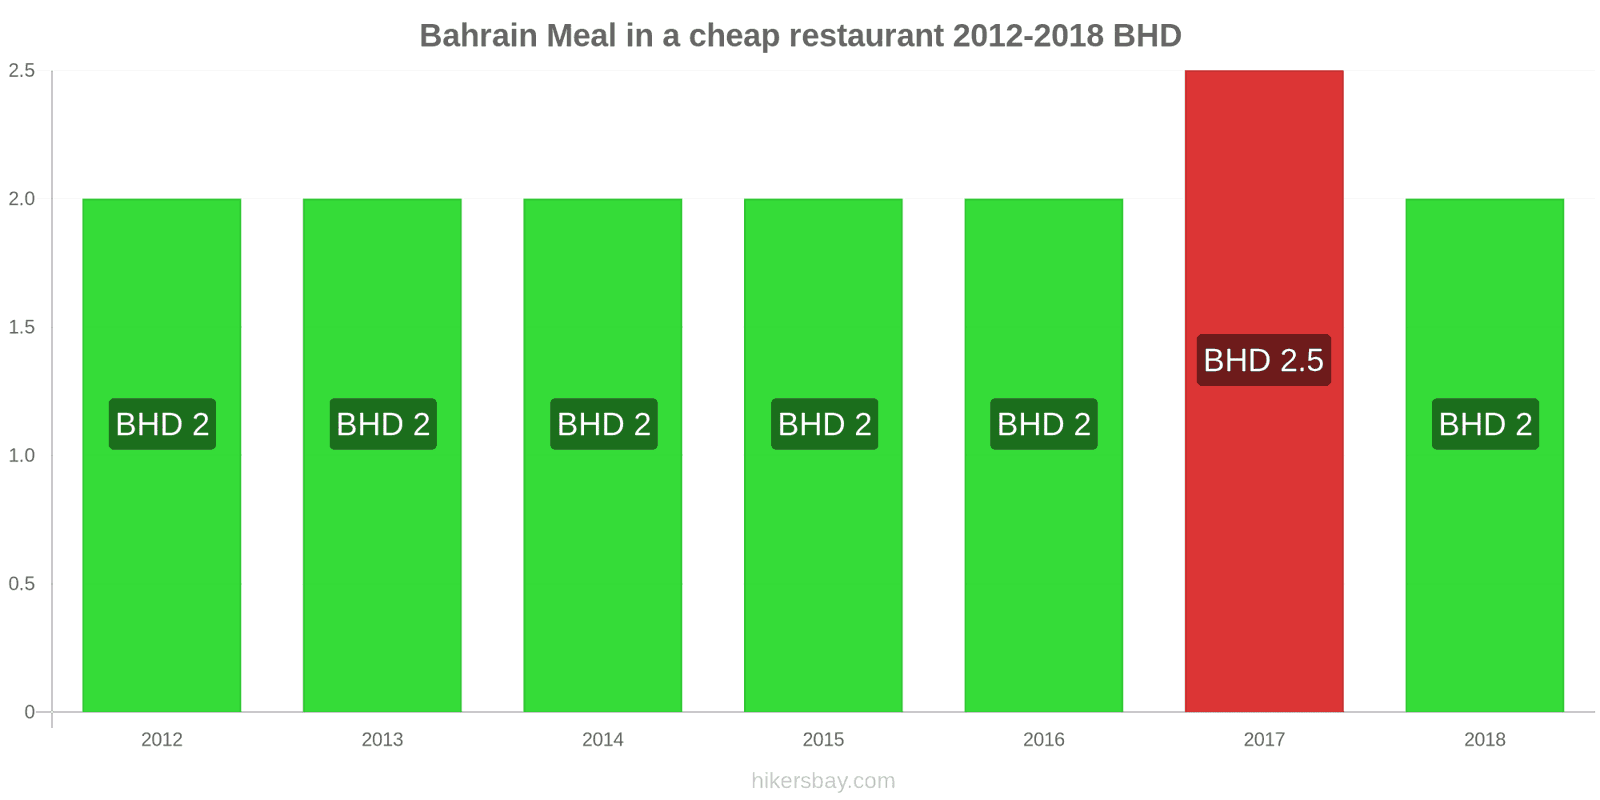 Bahrain price changes Meal in a cheap restaurant hikersbay.com